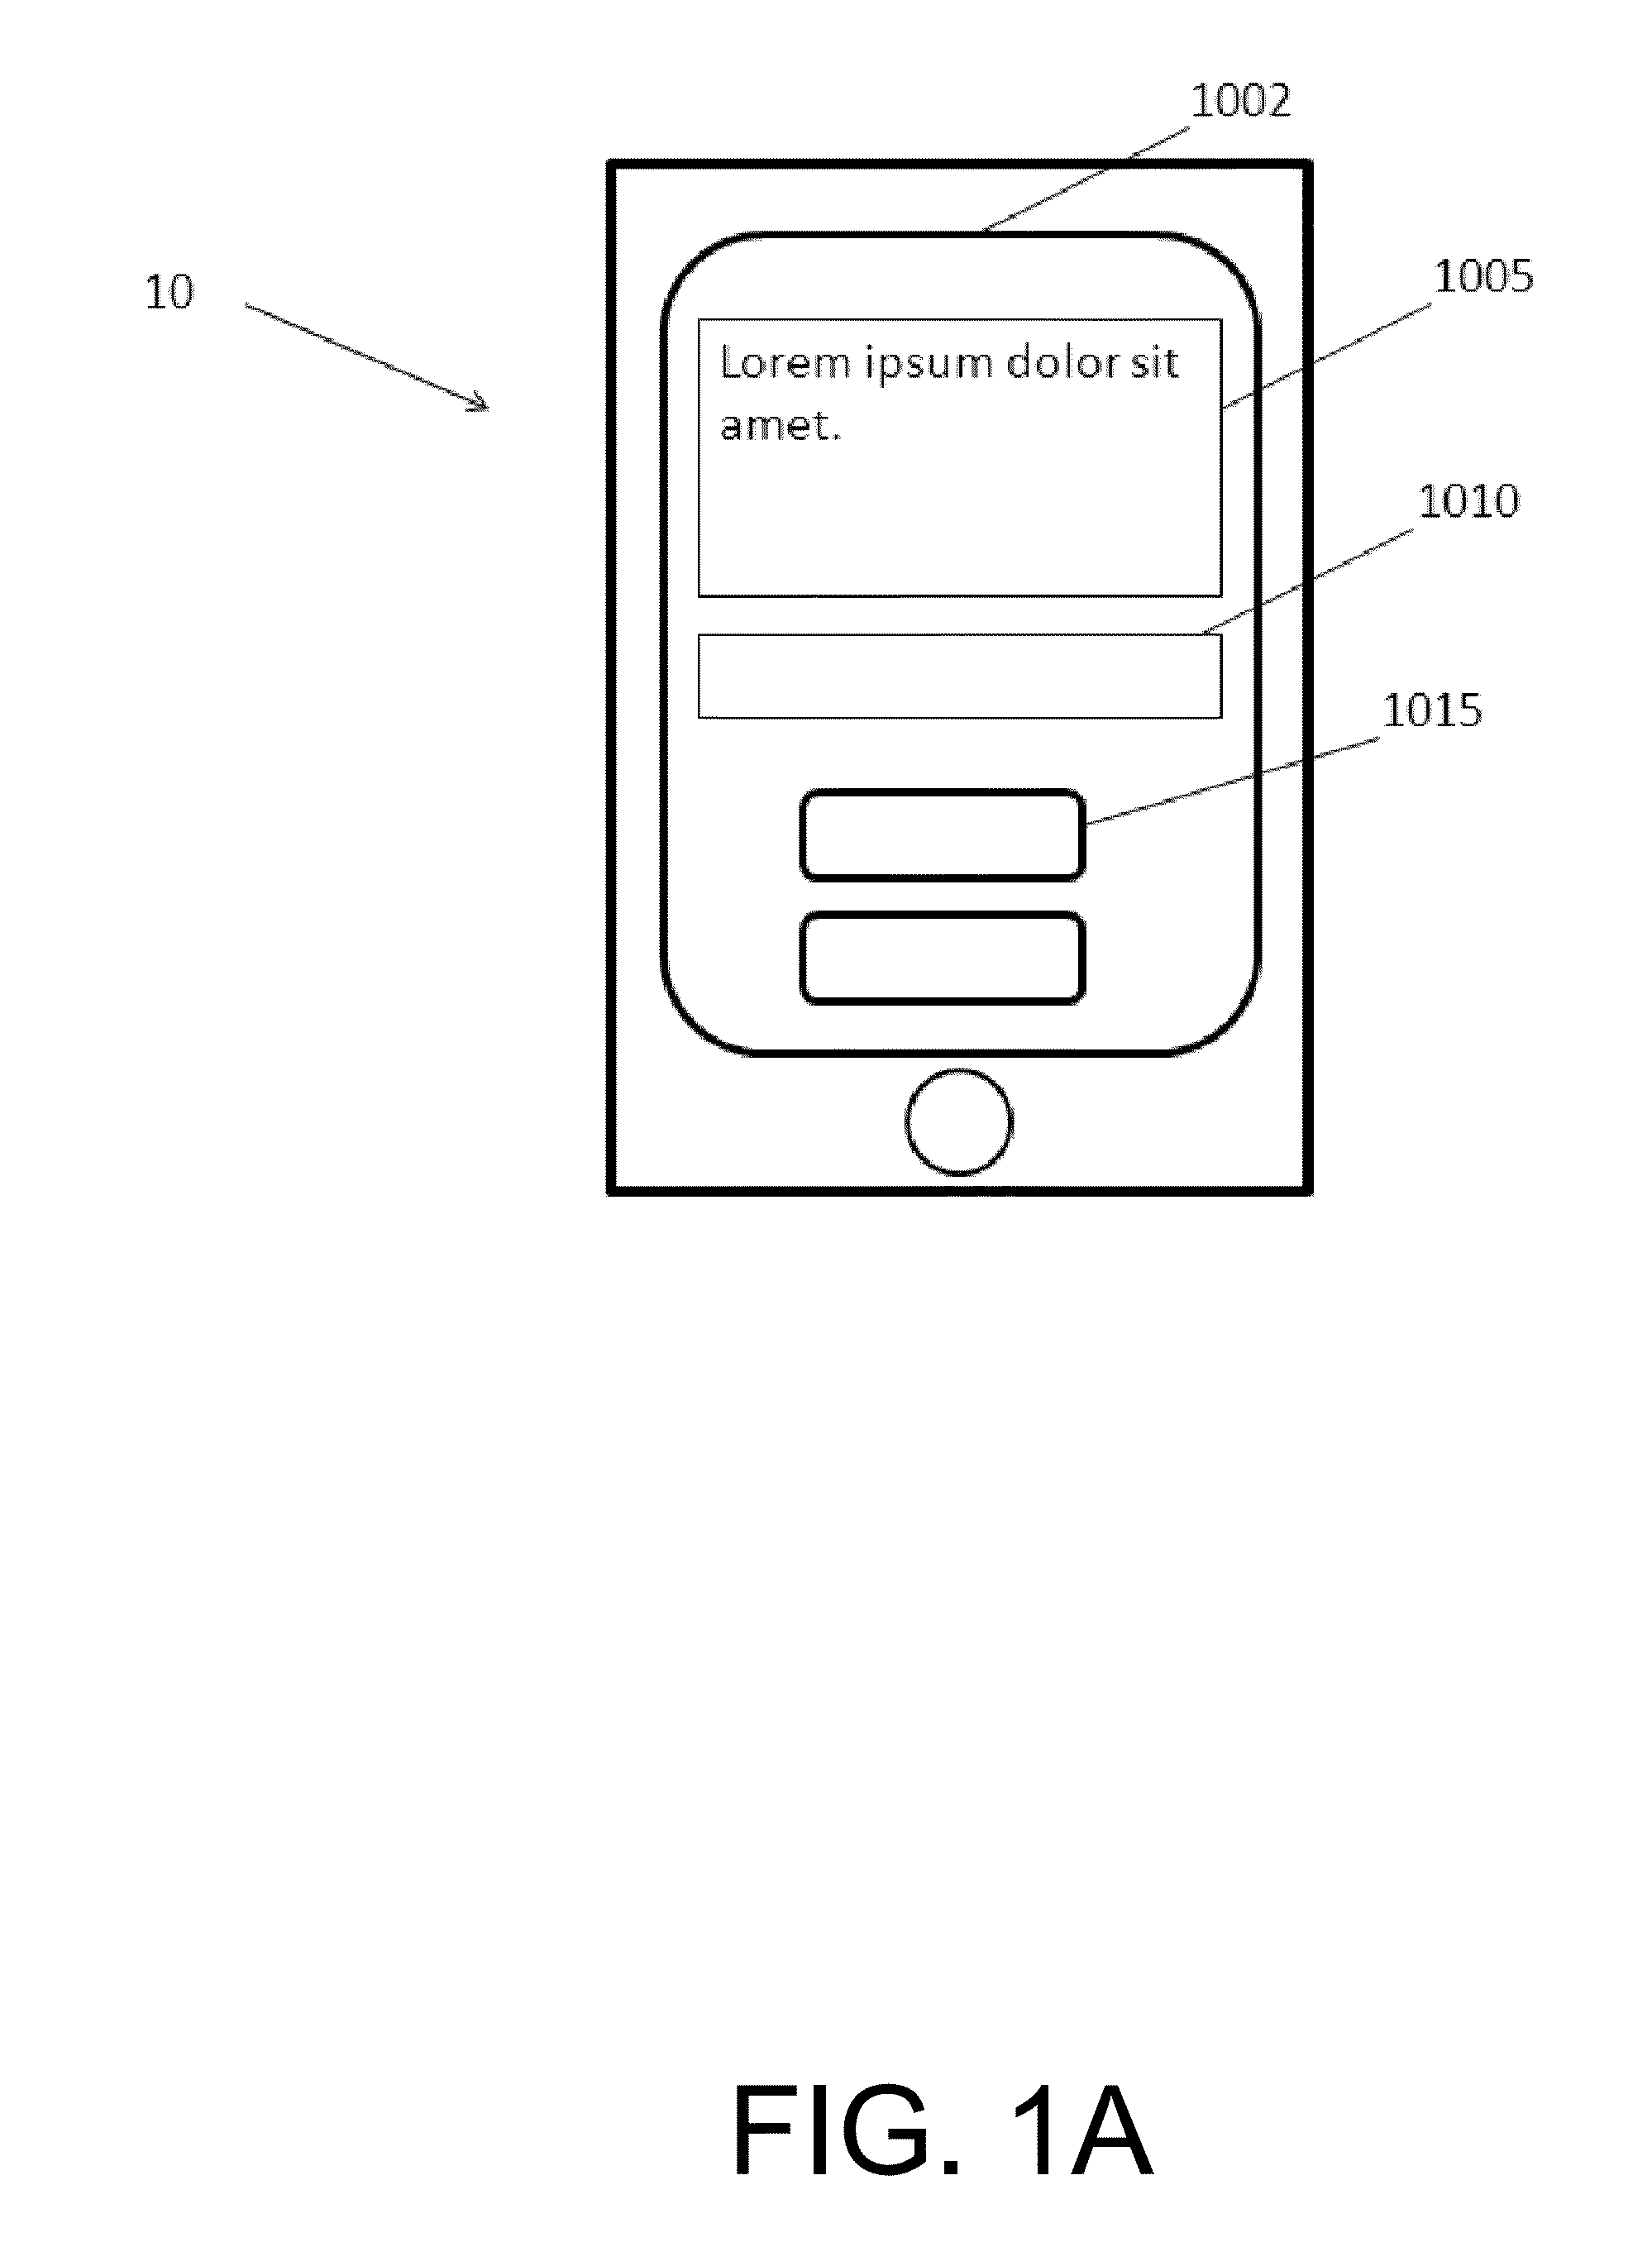 System and method for supporting self service and associated agent-assisted service call routing